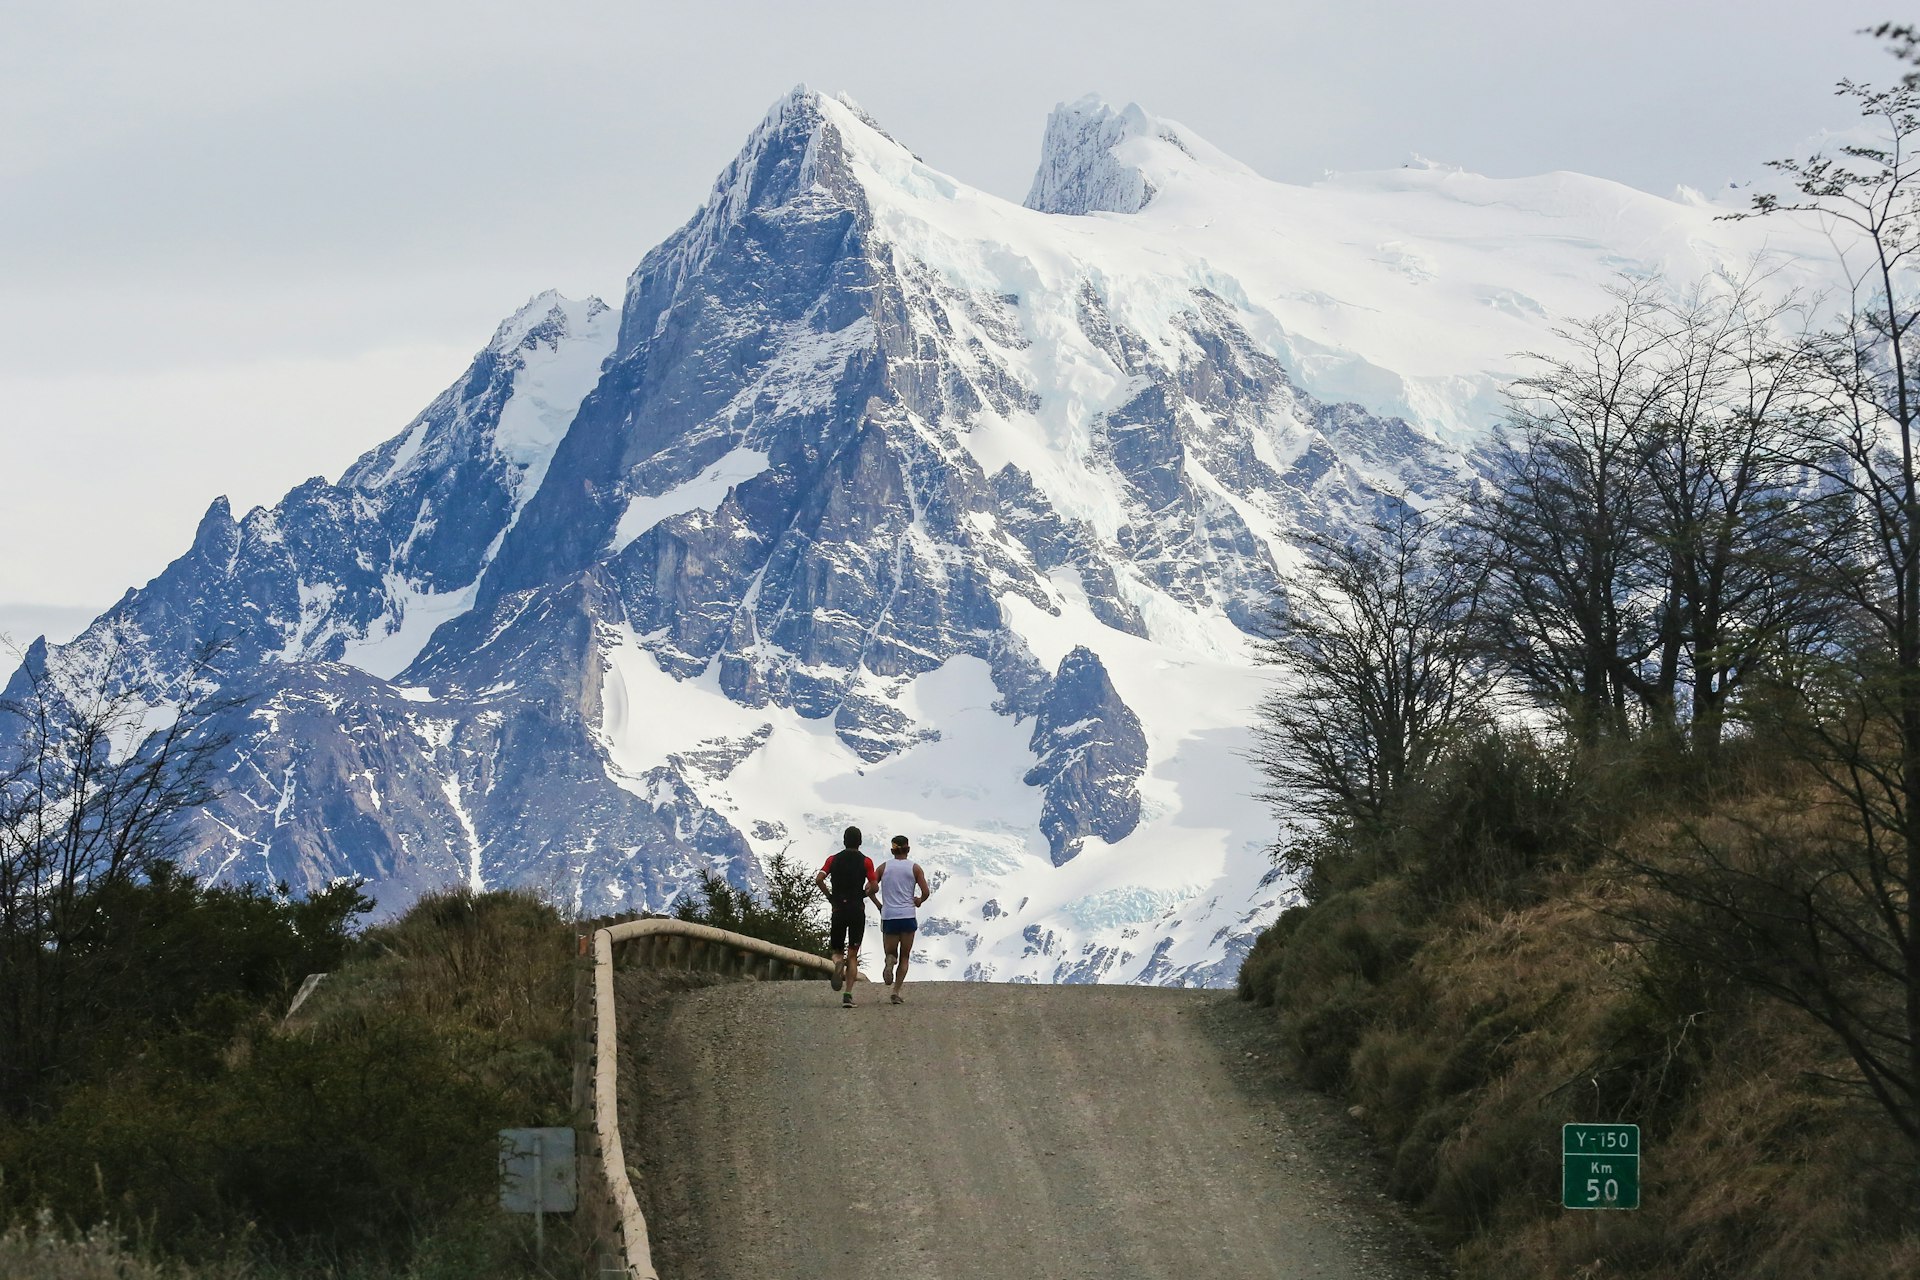 Athletes competing during the Patagonian International Marathon run over the crest of a road, with hulking, snow-capped mountains in the background.